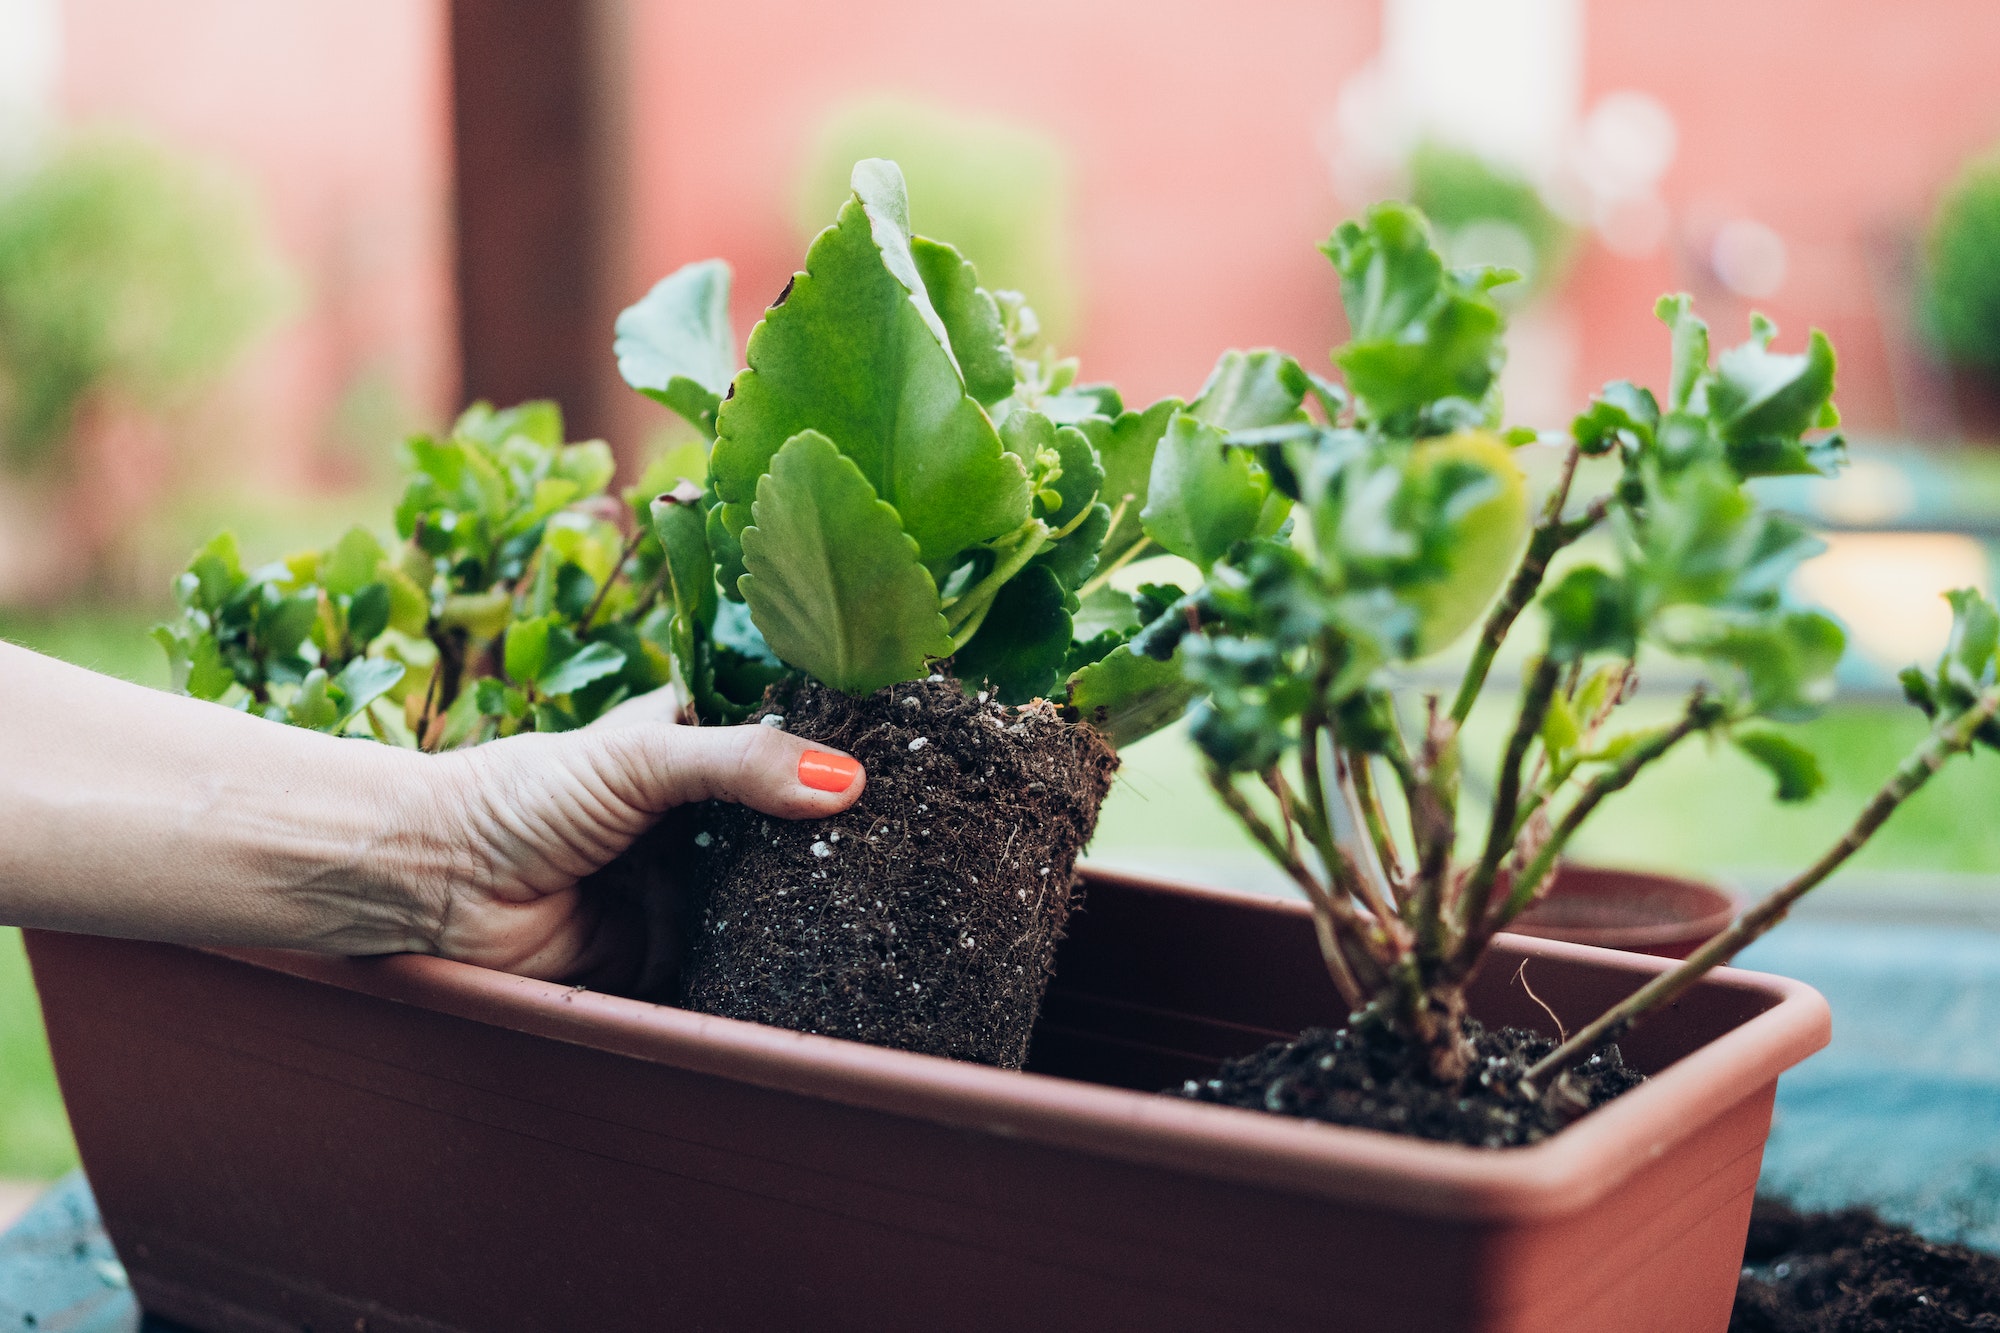 A woman's hands planting a plant in a rectangular pot